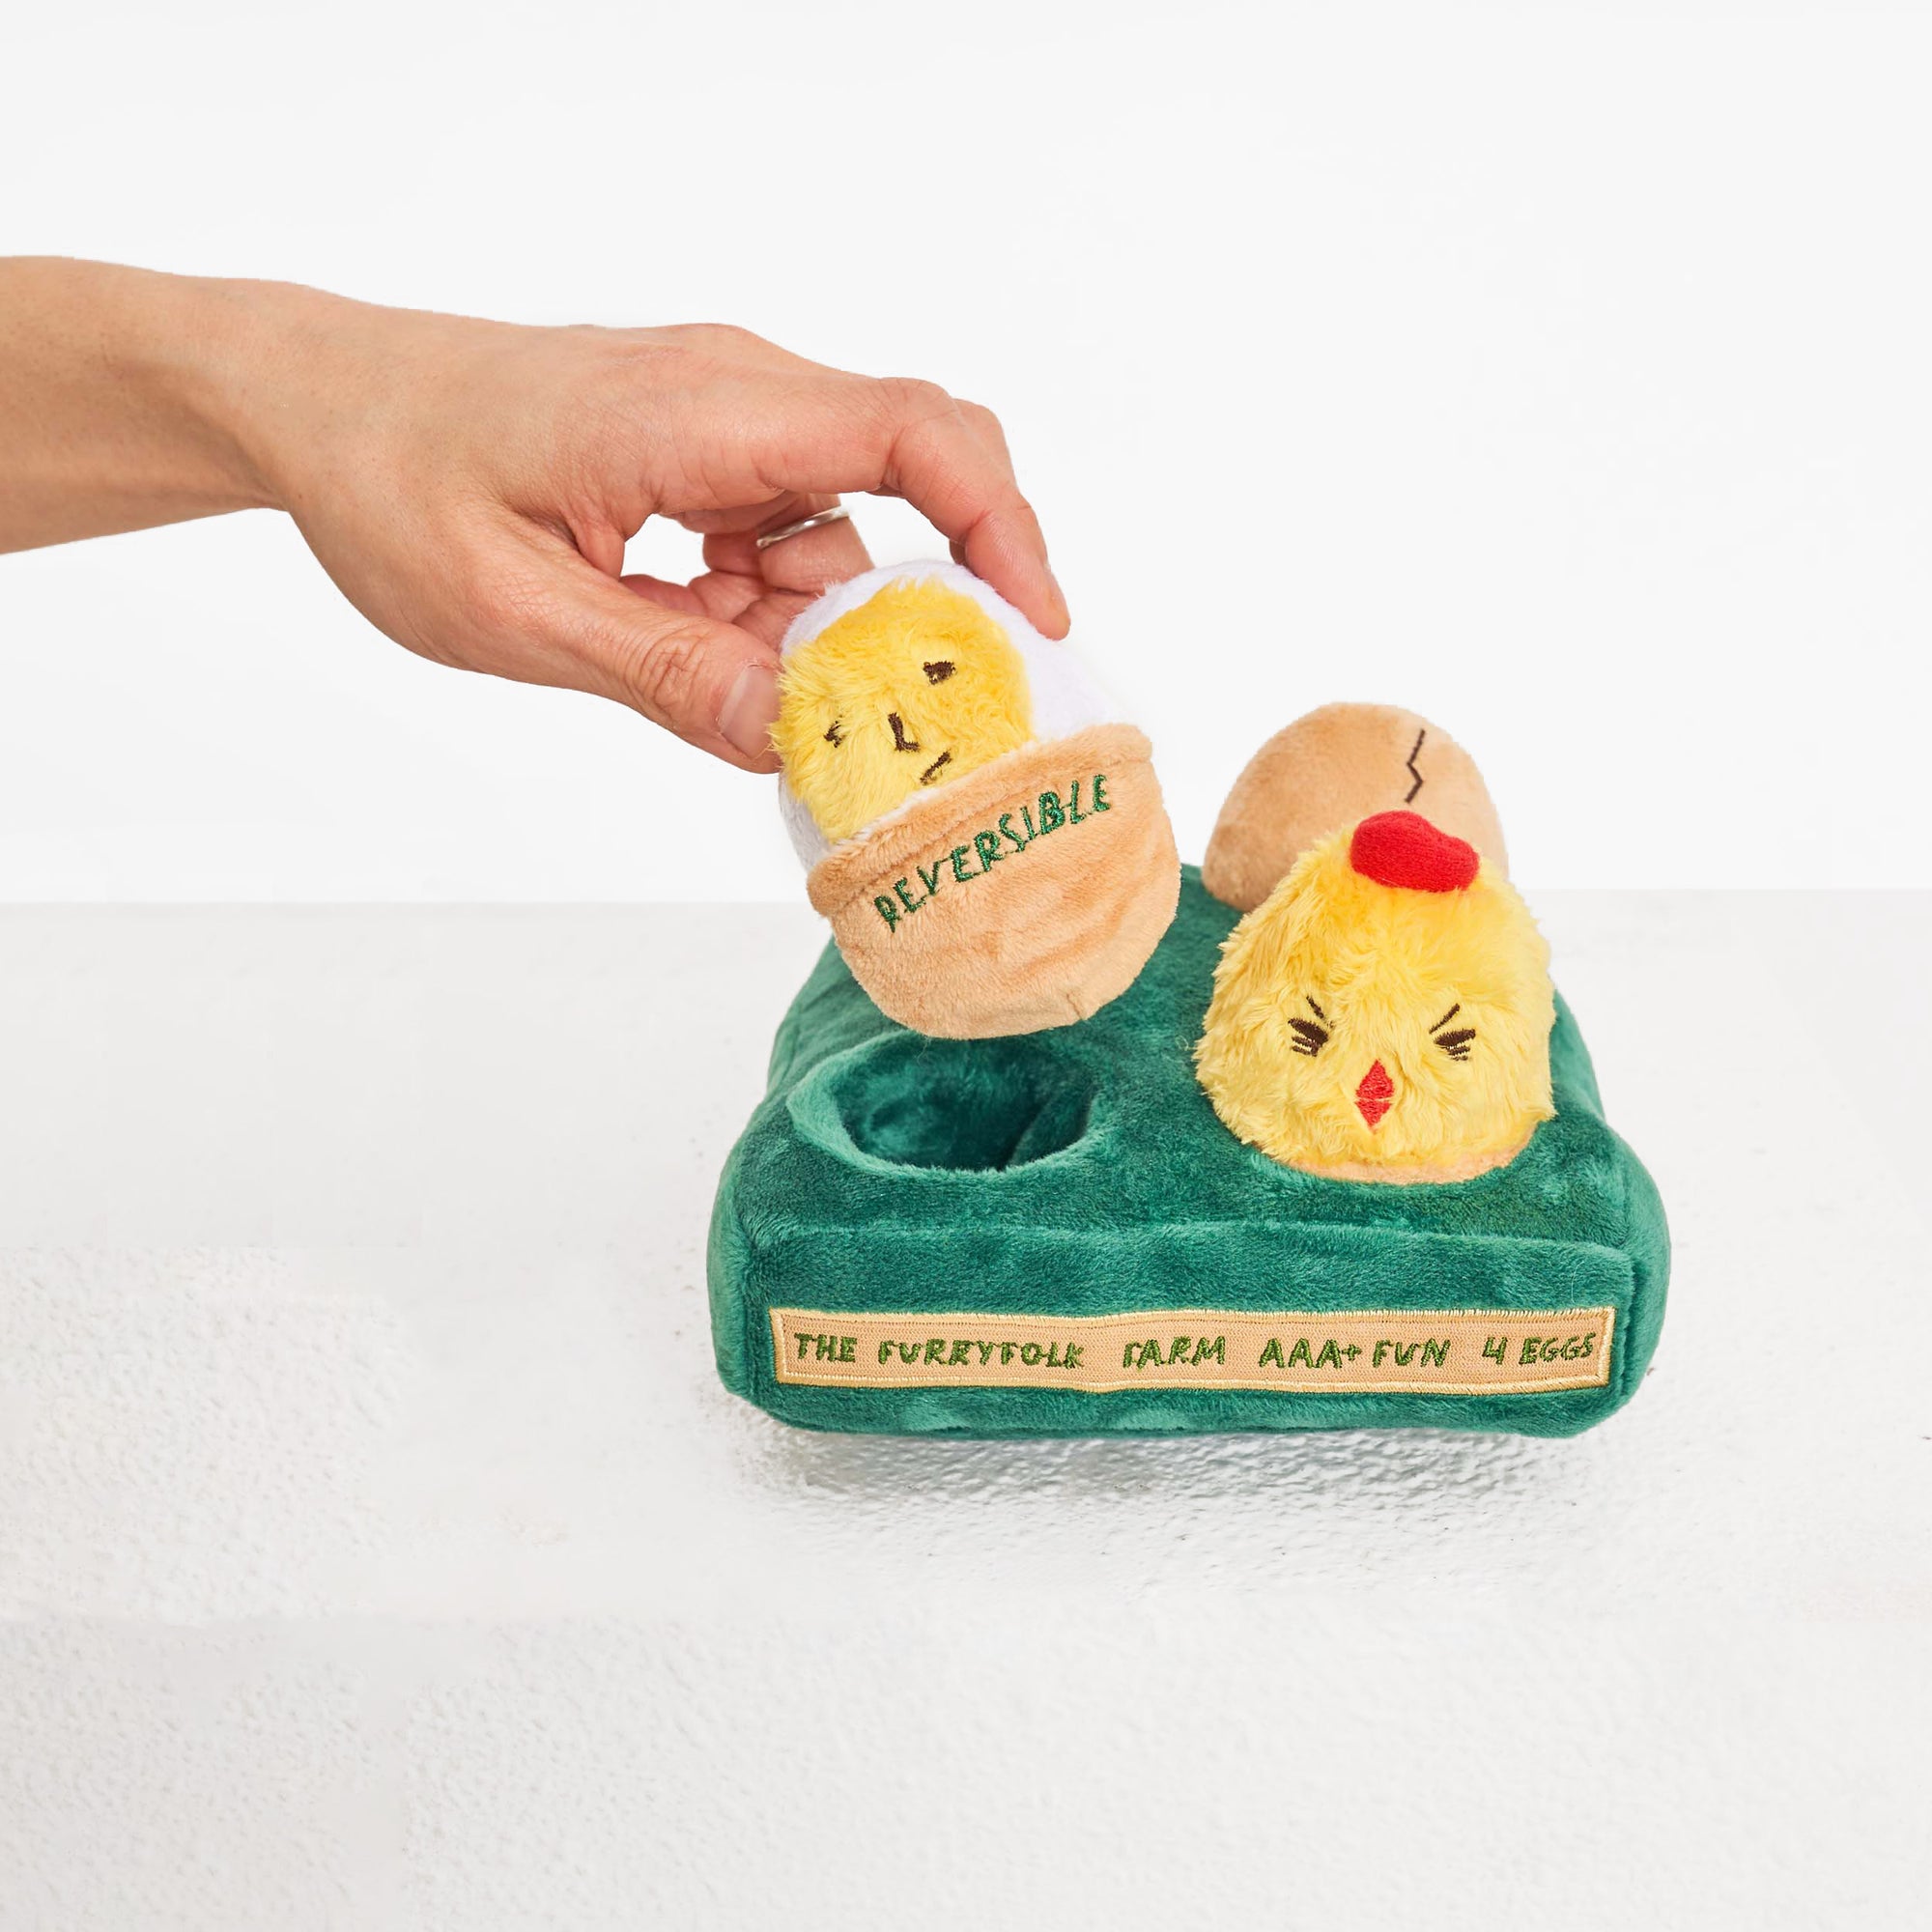 Hand picking a reversible chick plush from a farm-themed dog puzzle toy.